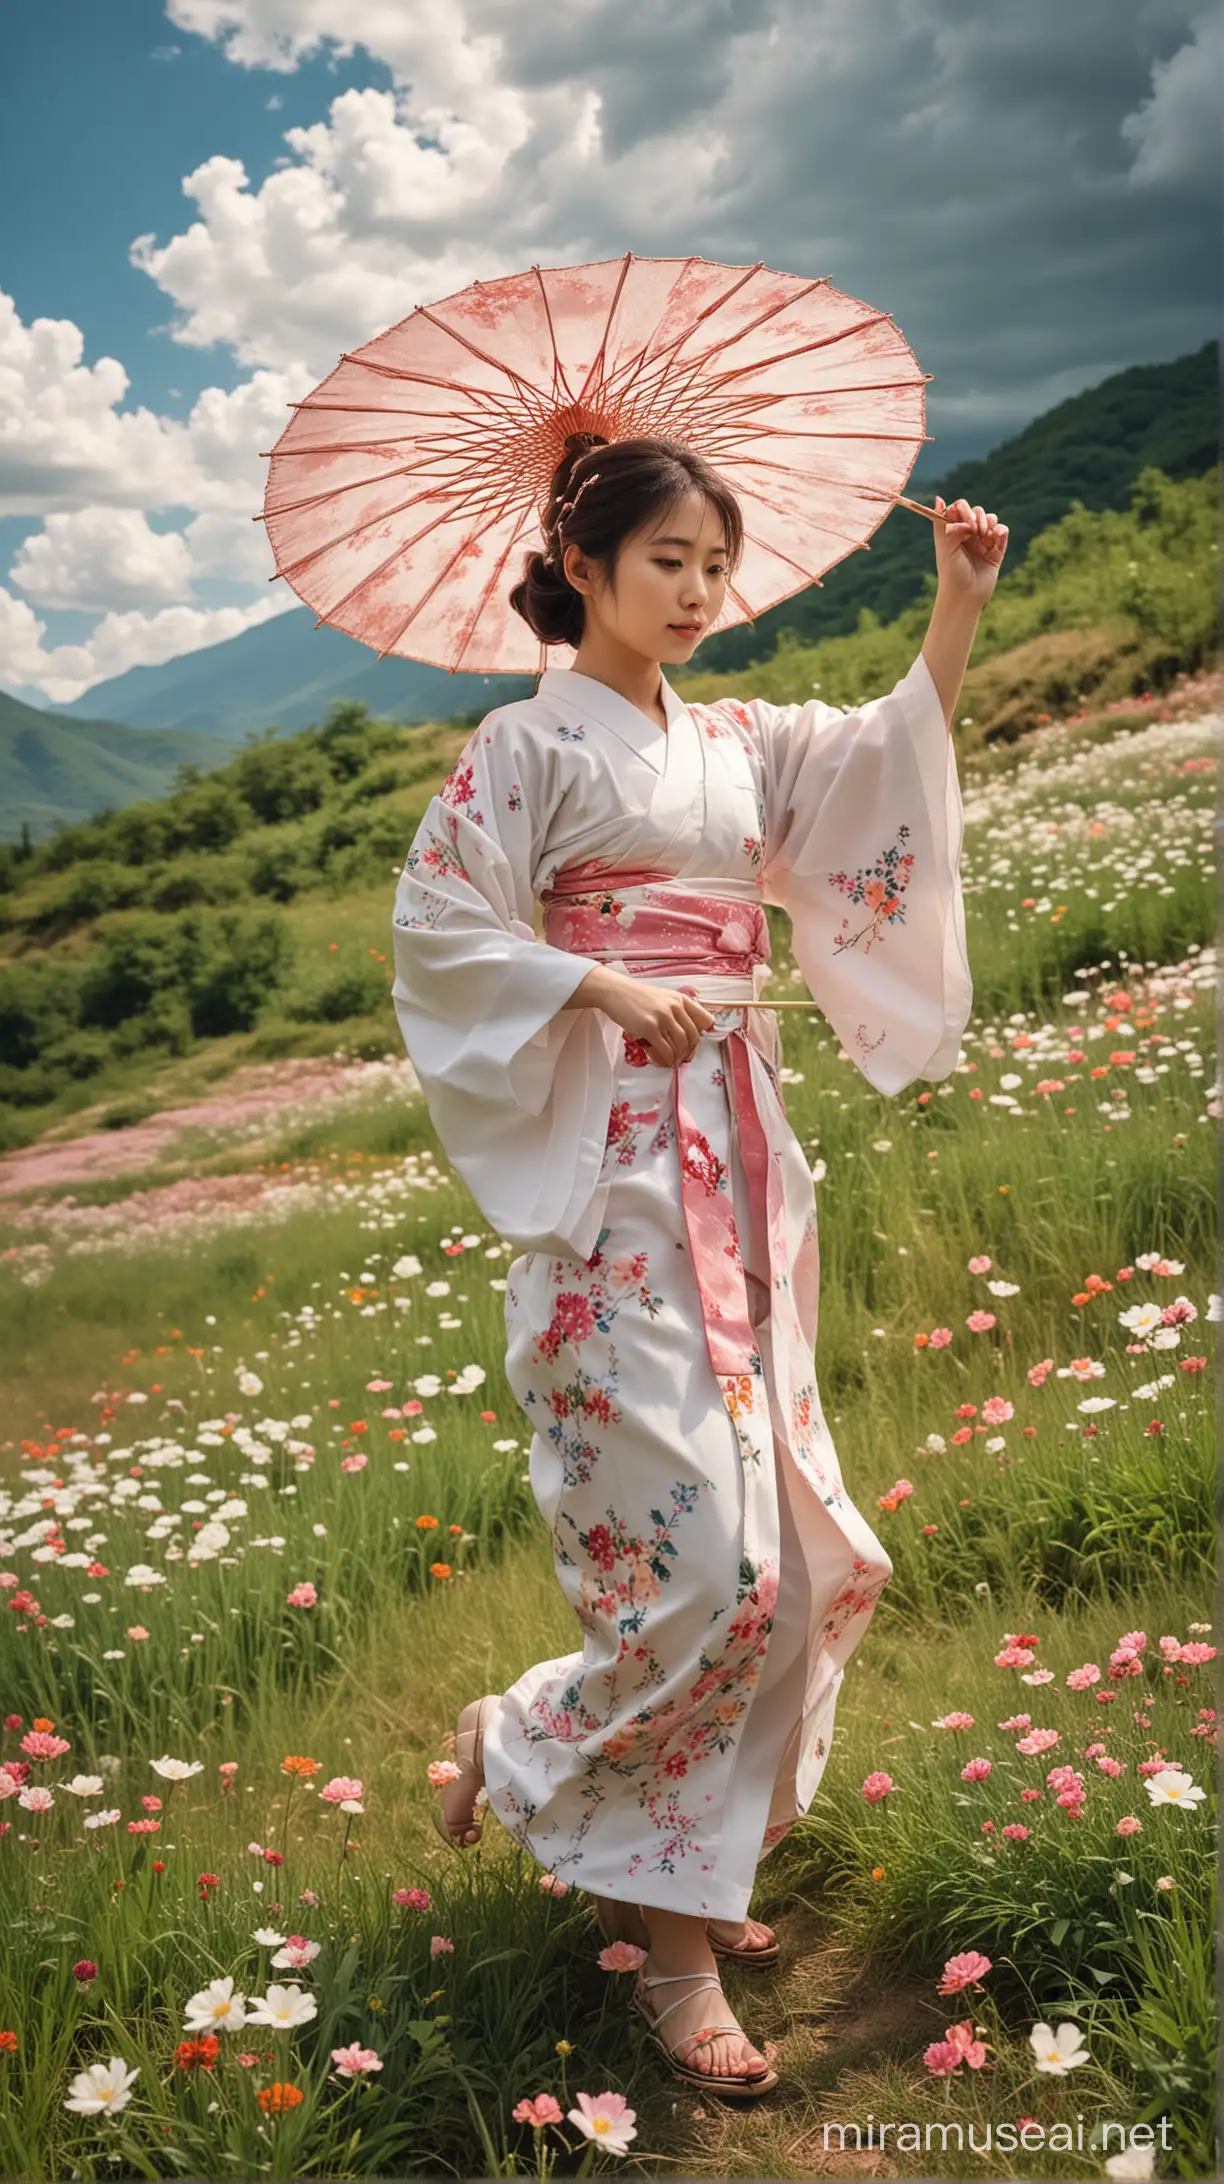 Create a picture of a cute Japanese girl stretching arms and legin traditional dress in the open valley with some flowers with white umbrella and some beautiful clouds.
Make the camera angle from downside and far.